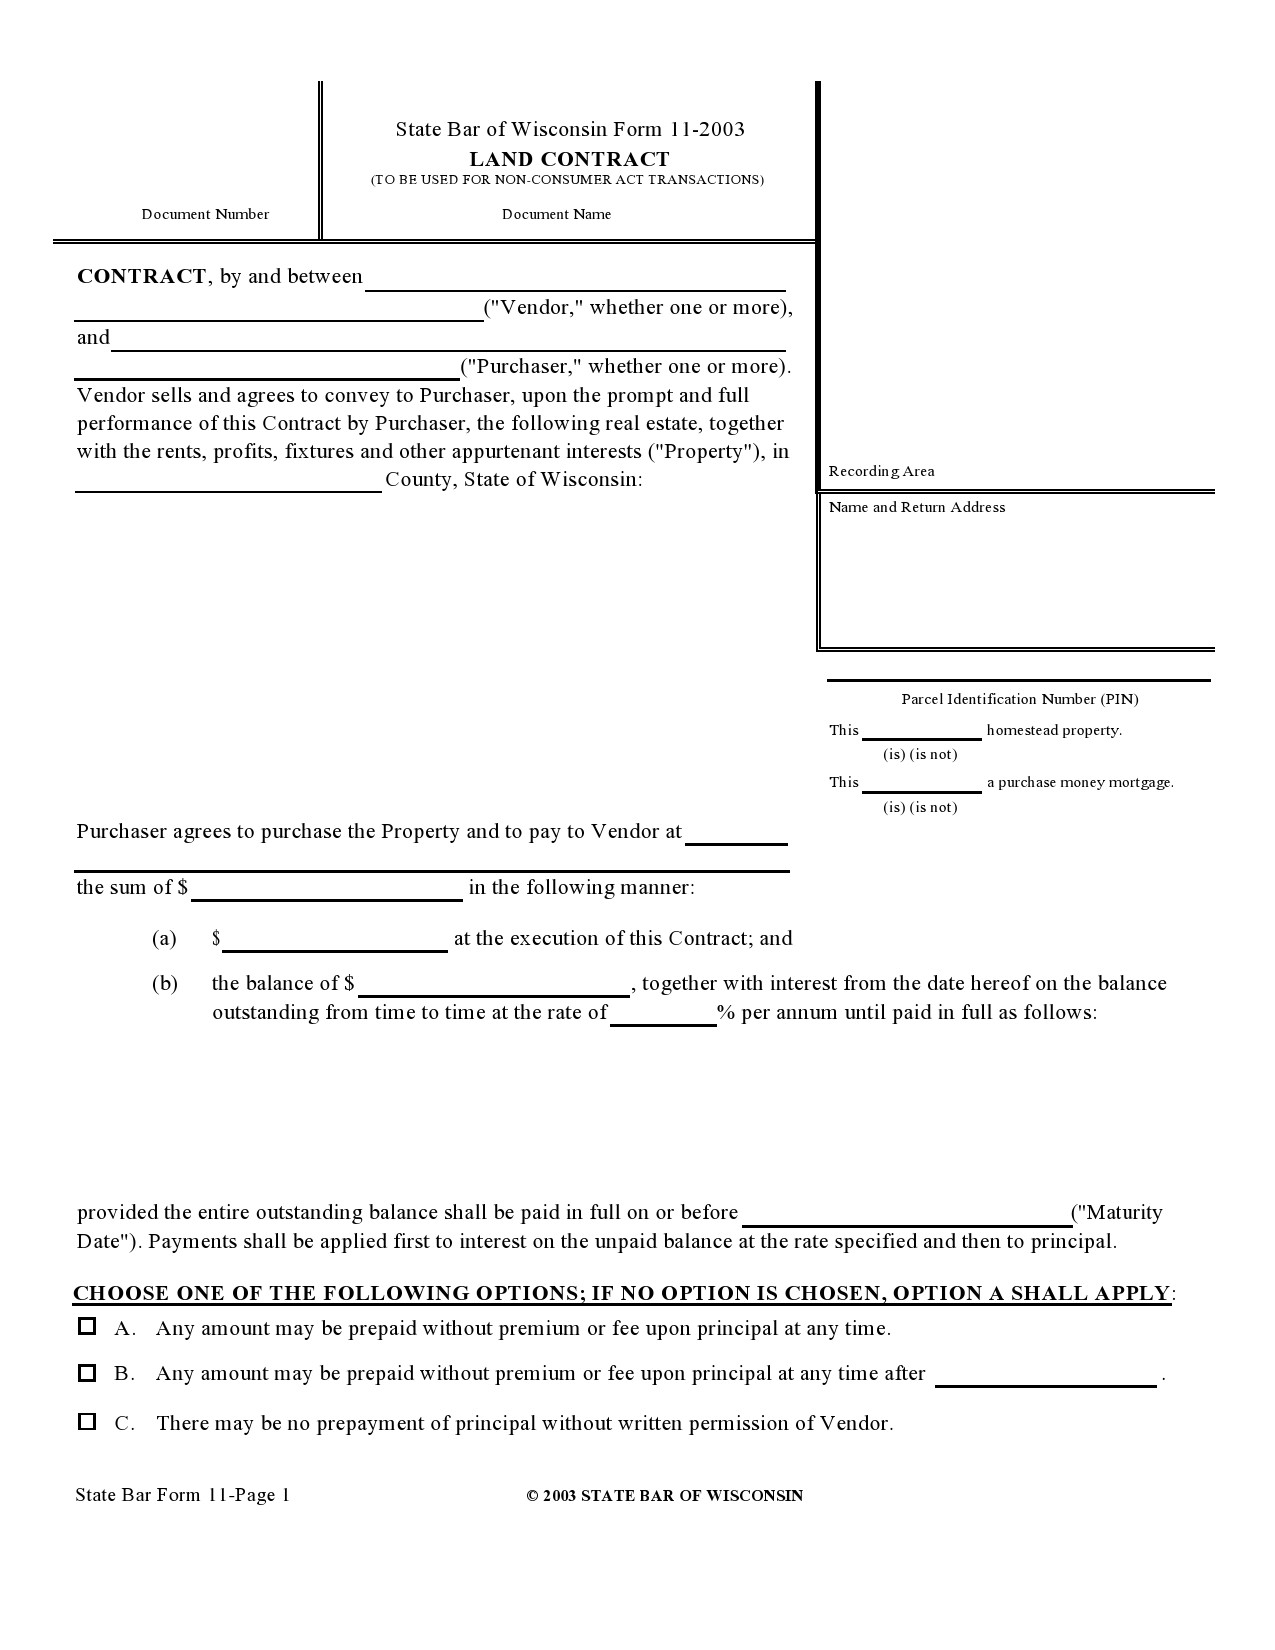 Free land contract form 03